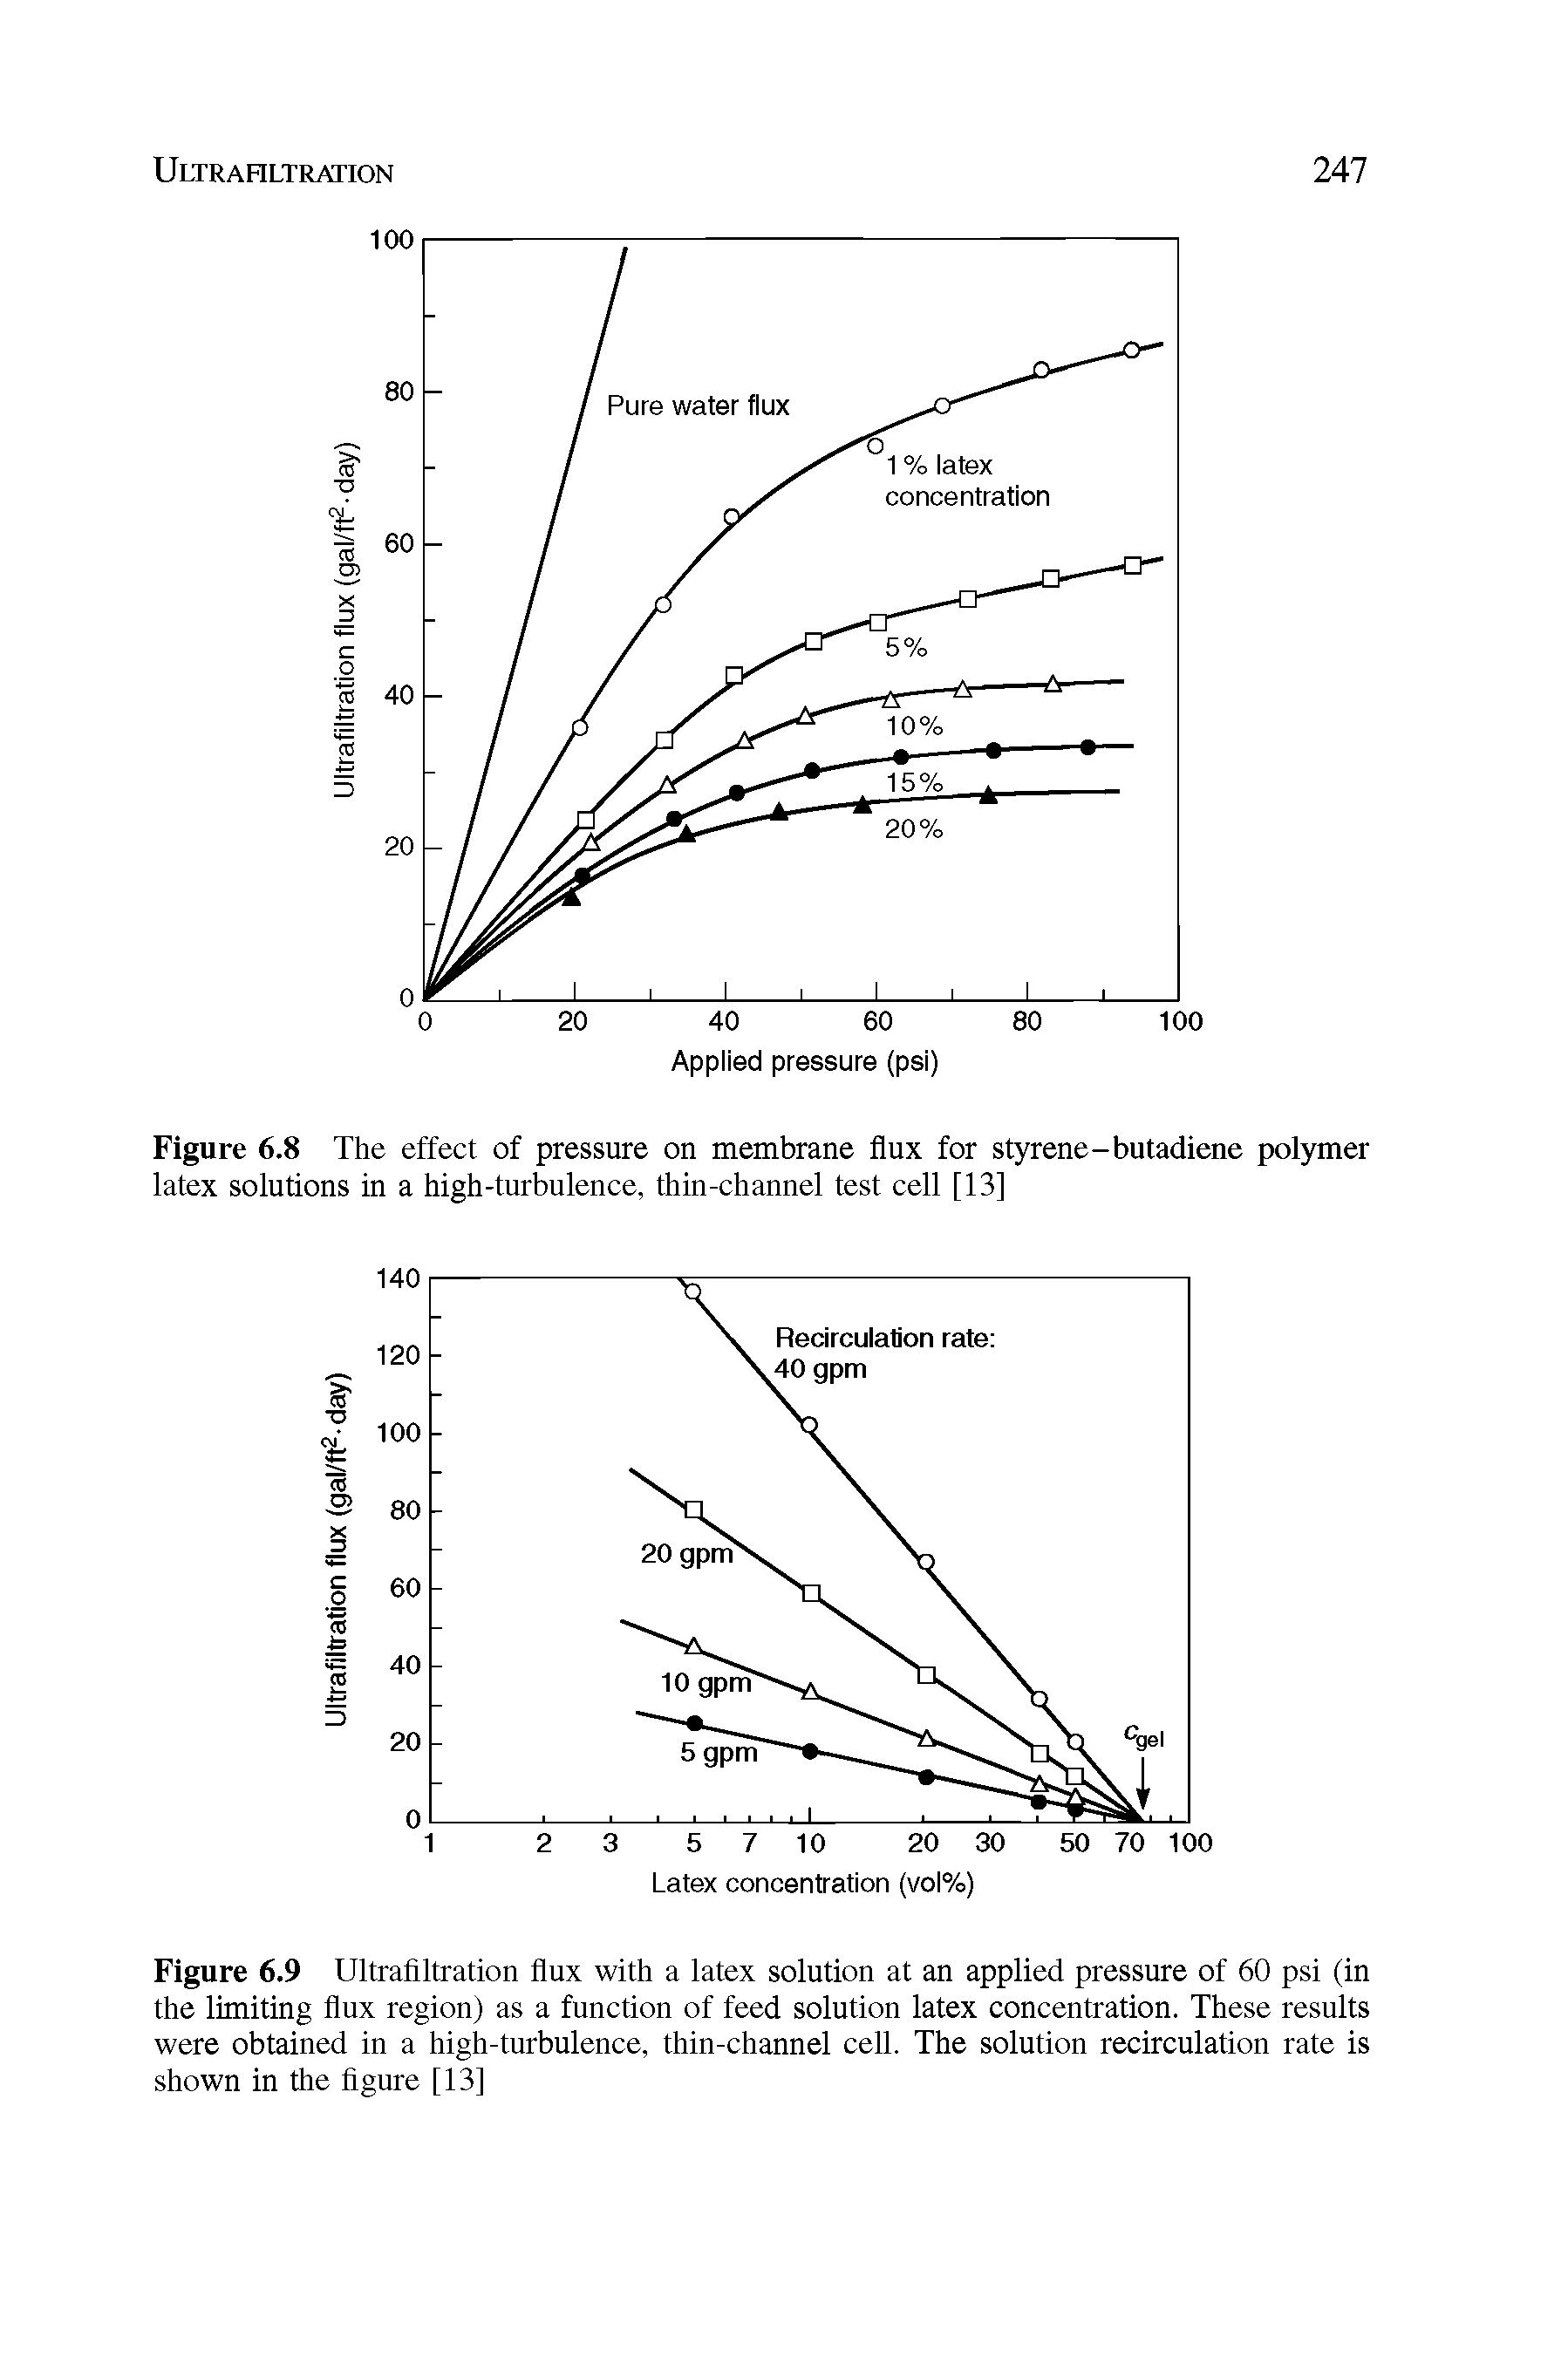 Figure 6.9 Ultrafiltration flux with a latex solution at an applied pressure of 60 psi (in the limiting flux region) as a function of feed solution latex concentration. These results were obtained in a high-turbulence, thin-channel cell. The solution recirculation rate is shown in the figure [13]...